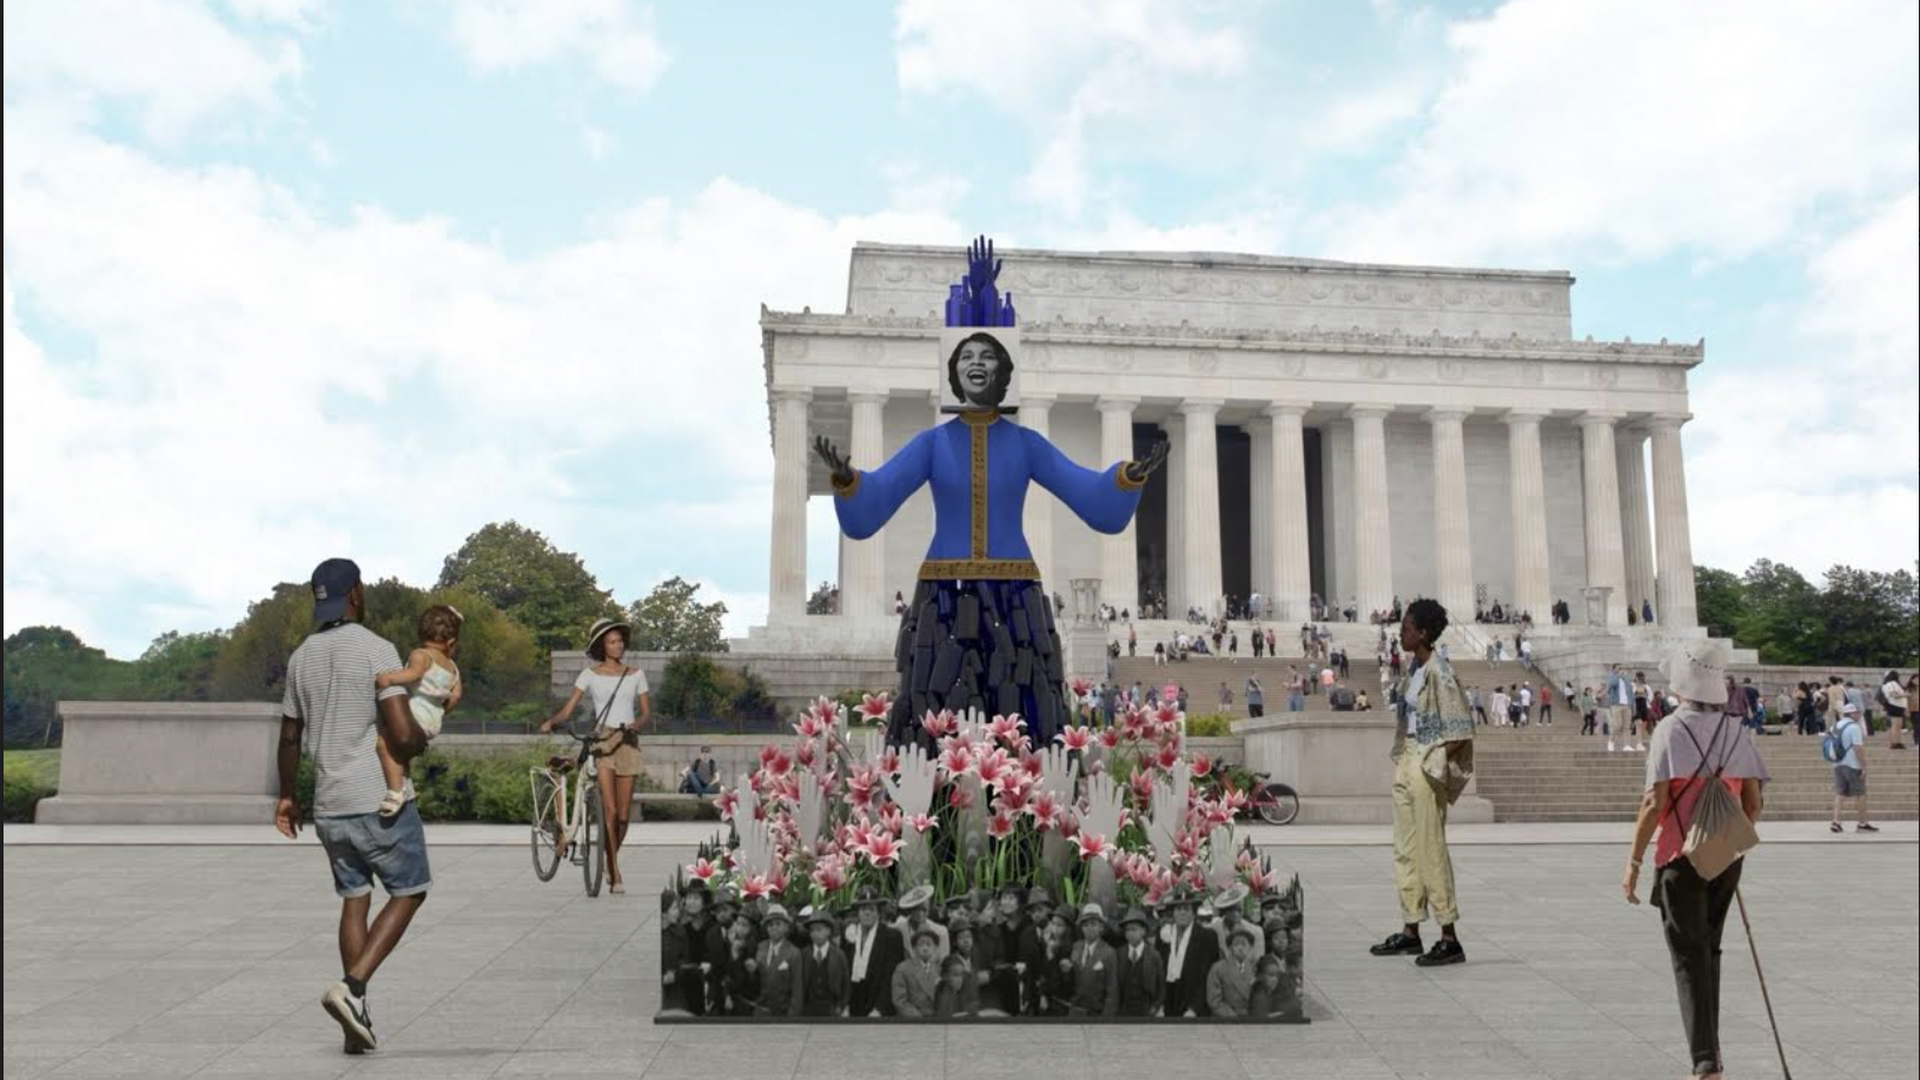 Rending of Pennsylvania artist Vanessa German's installation, "Of Thee We Sing" at the National Mall.